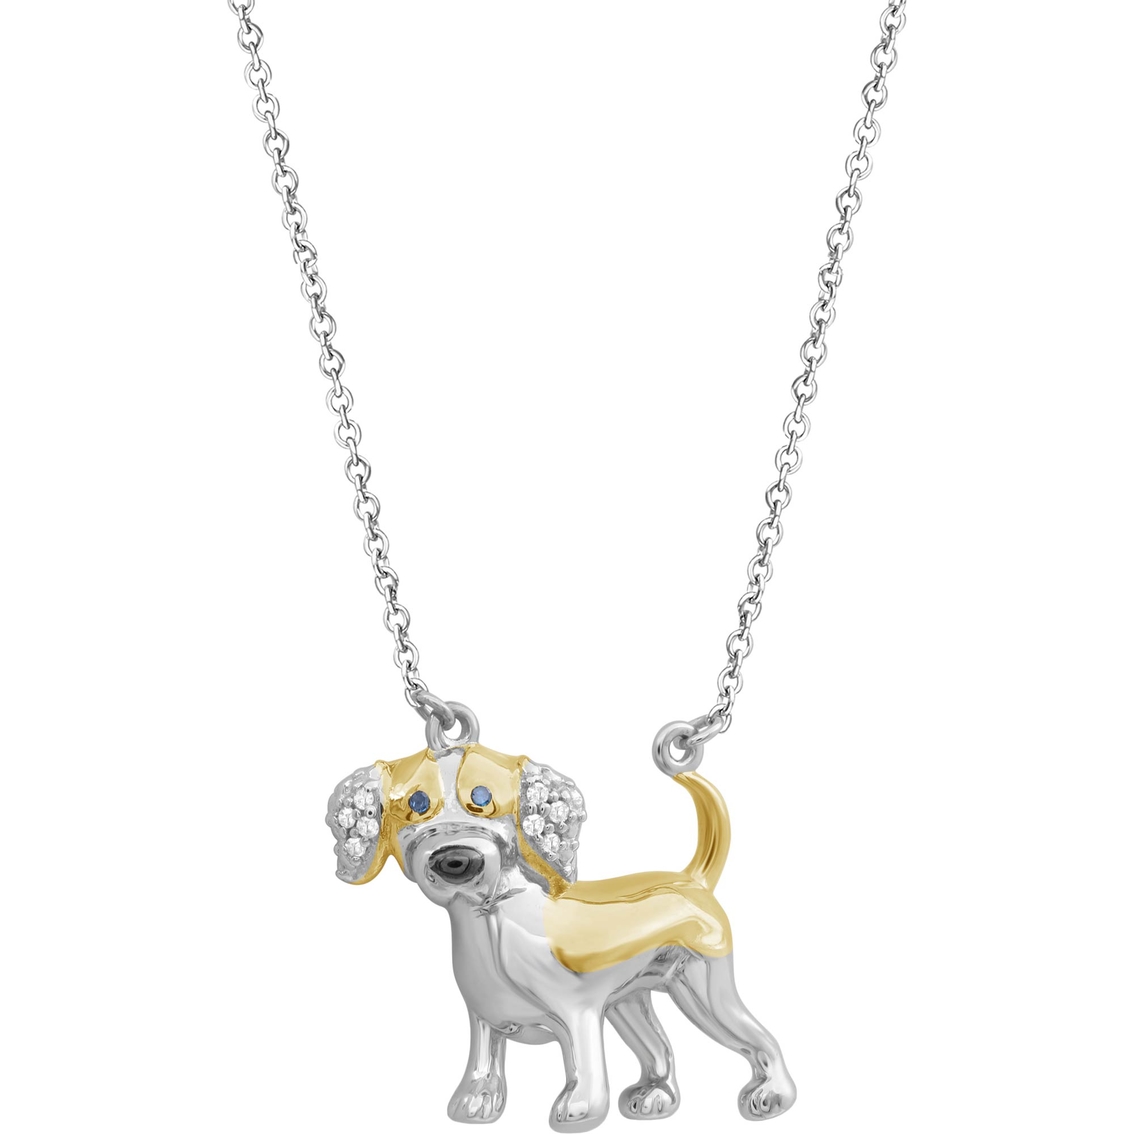 Animal's Rock Sterling 14K Plated Diamond Accent Beagle Dog Necklace 18 in. - Image 2 of 4